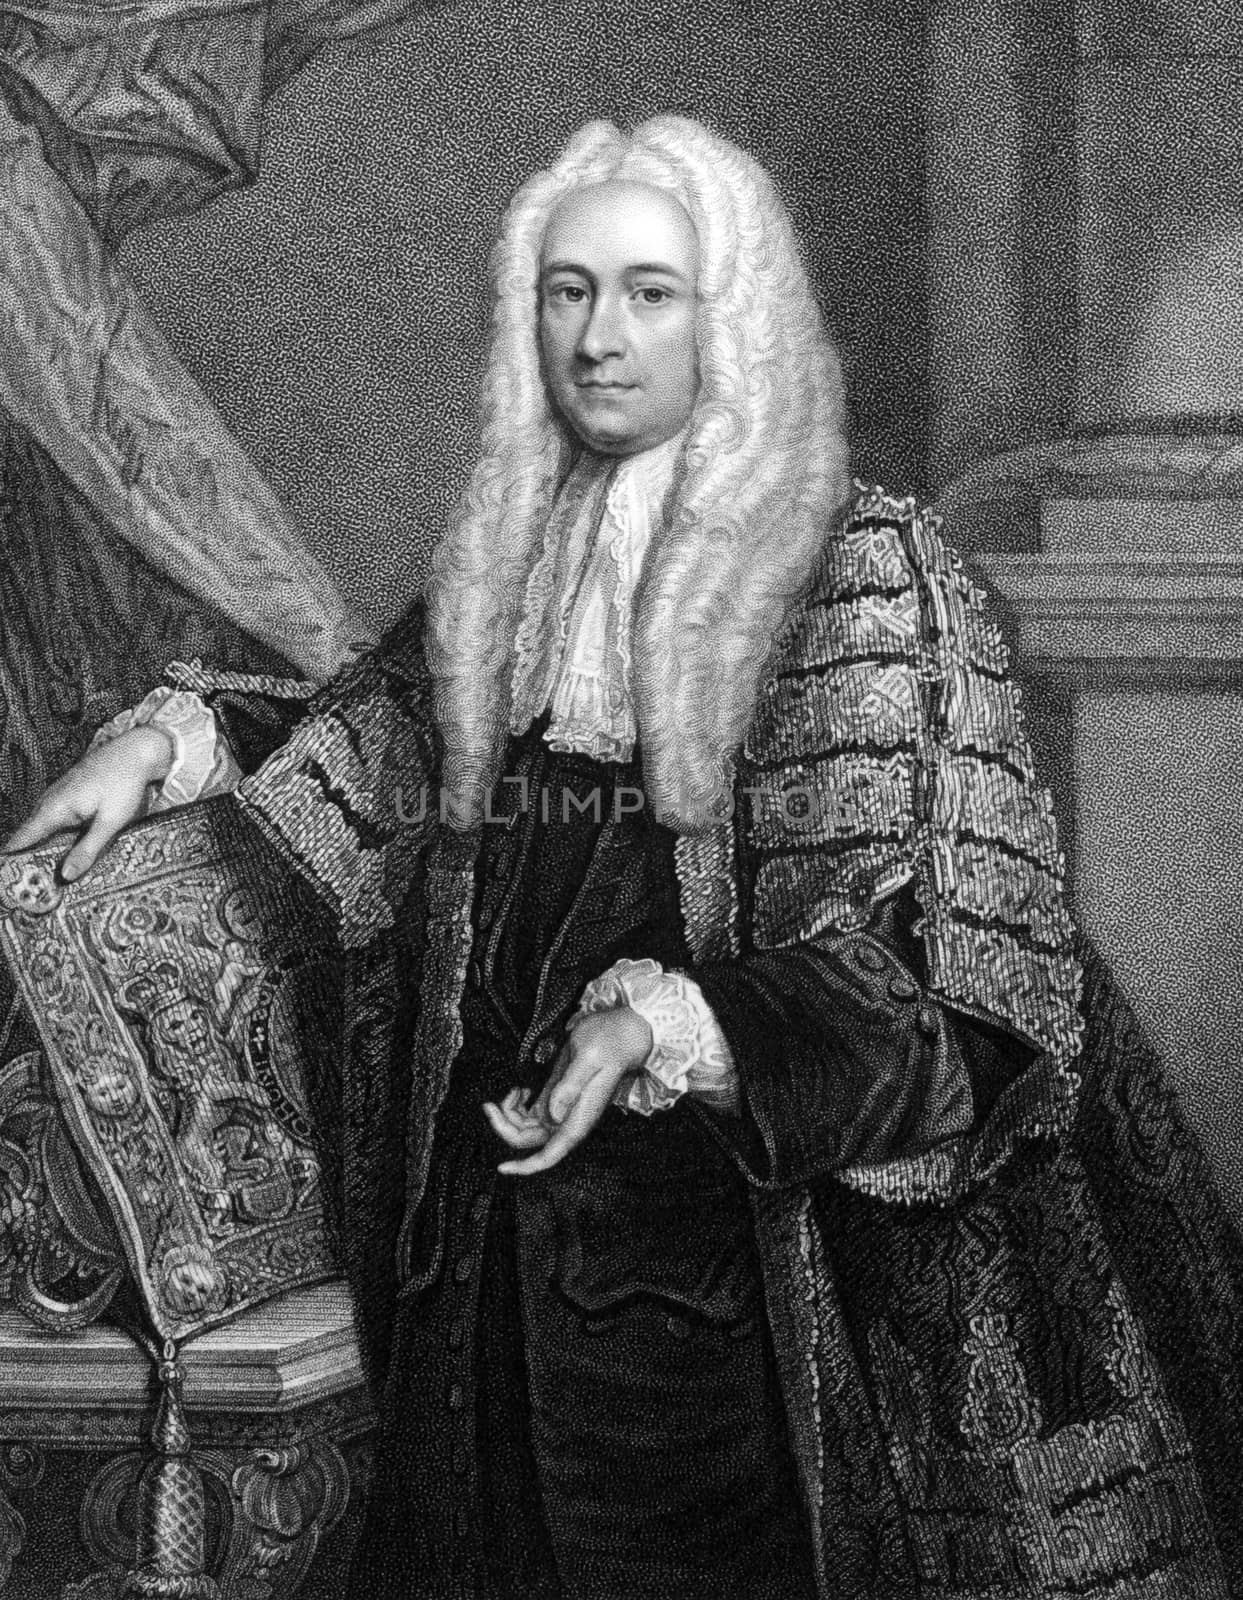 Philip Yorke, 1st Earl of Hardwicke (1690-1764) on engraving from 1832. English lawyer and politician. Engraved by W.T.Fry and published in ''Portraits of Illustrious Personages of Great Britain'',UK,1832.